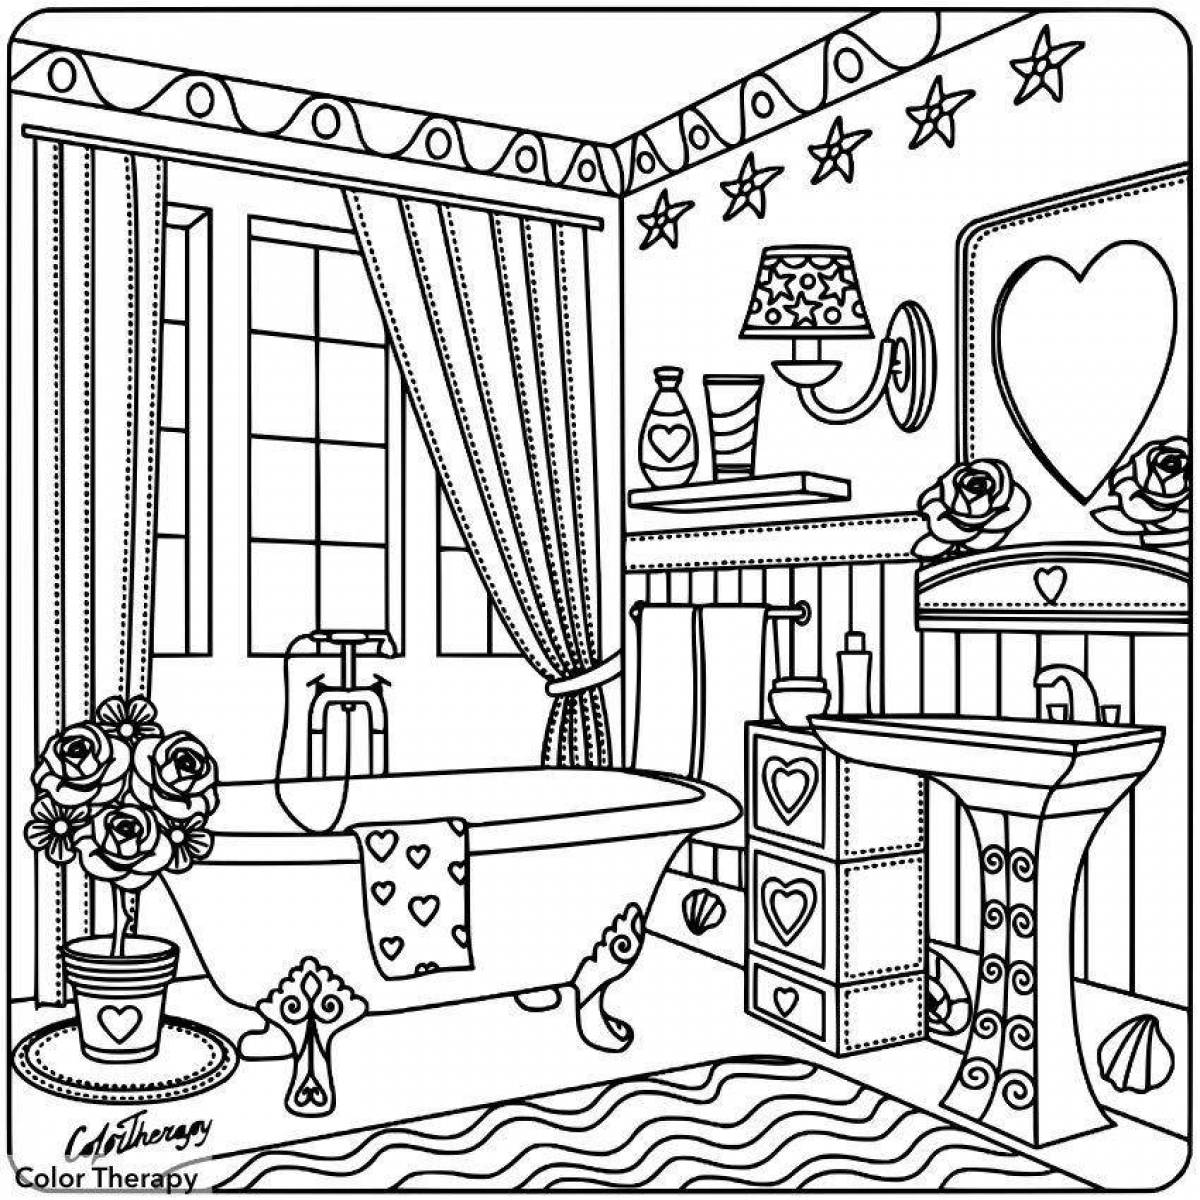 Fairytale coloring room with furniture